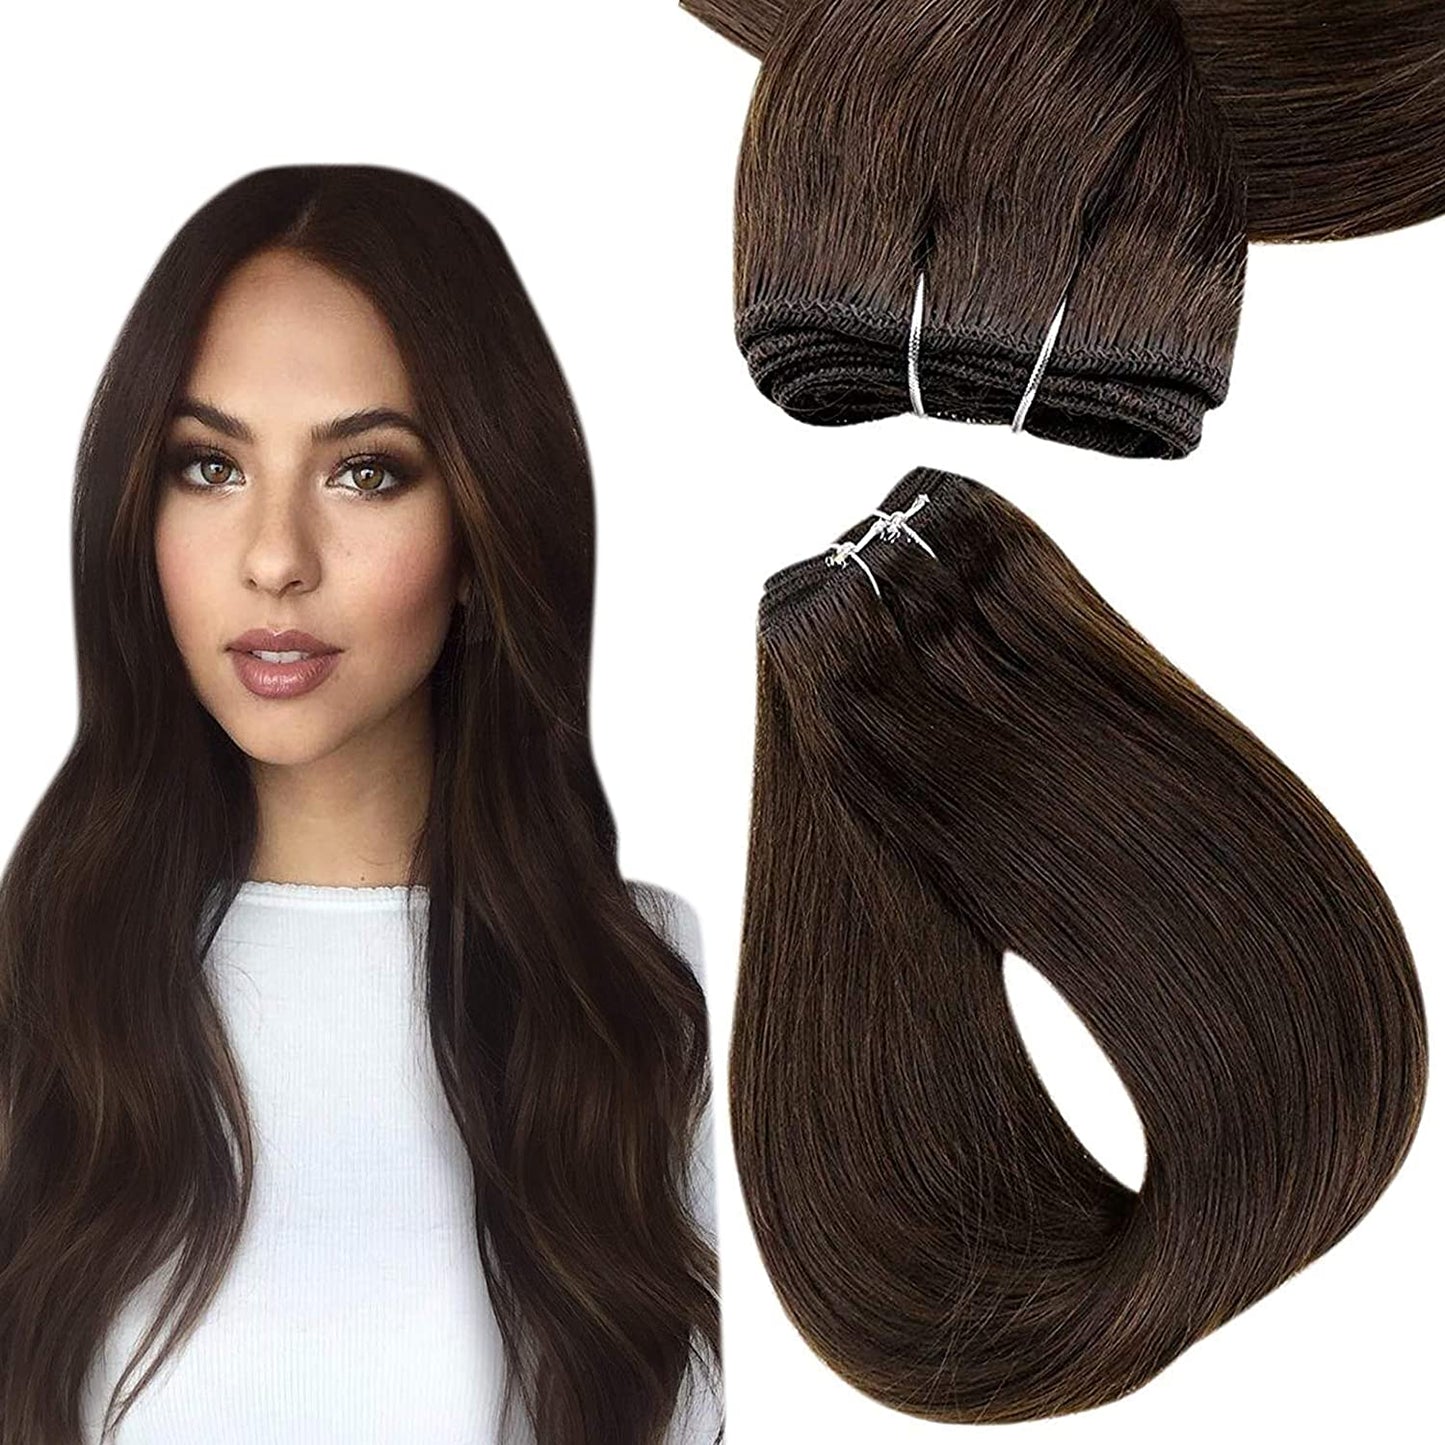 Best Natural Looking Remy Hair Weft Bundles Brazilian Human Hair +Add My Professional Sew in Hair Extensions Installation Salon Service